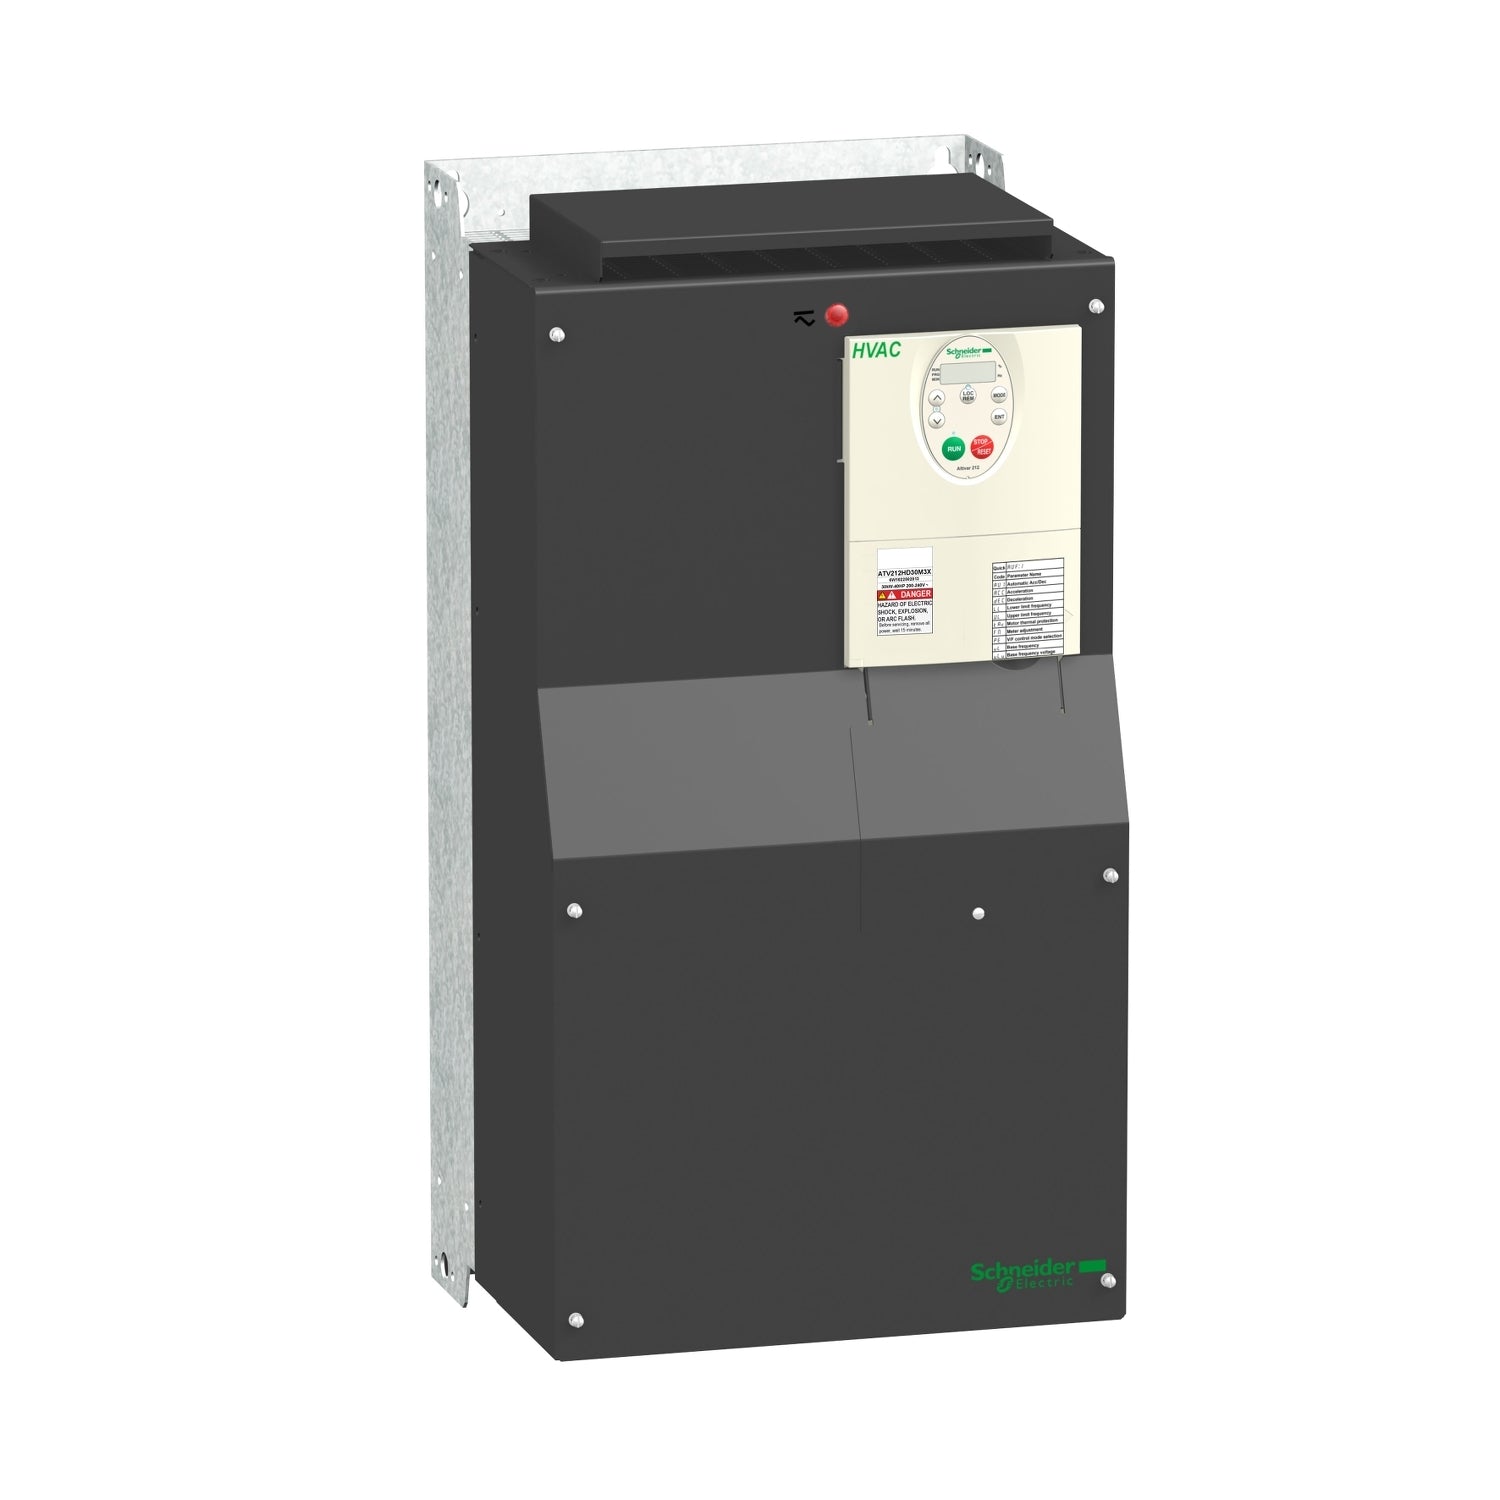 ATV212HD55N4 | Schneider Electric | Variable speed drive, Altivar 212, 55kW, 75hp, 480V, 3 phases, with EMC, IP21